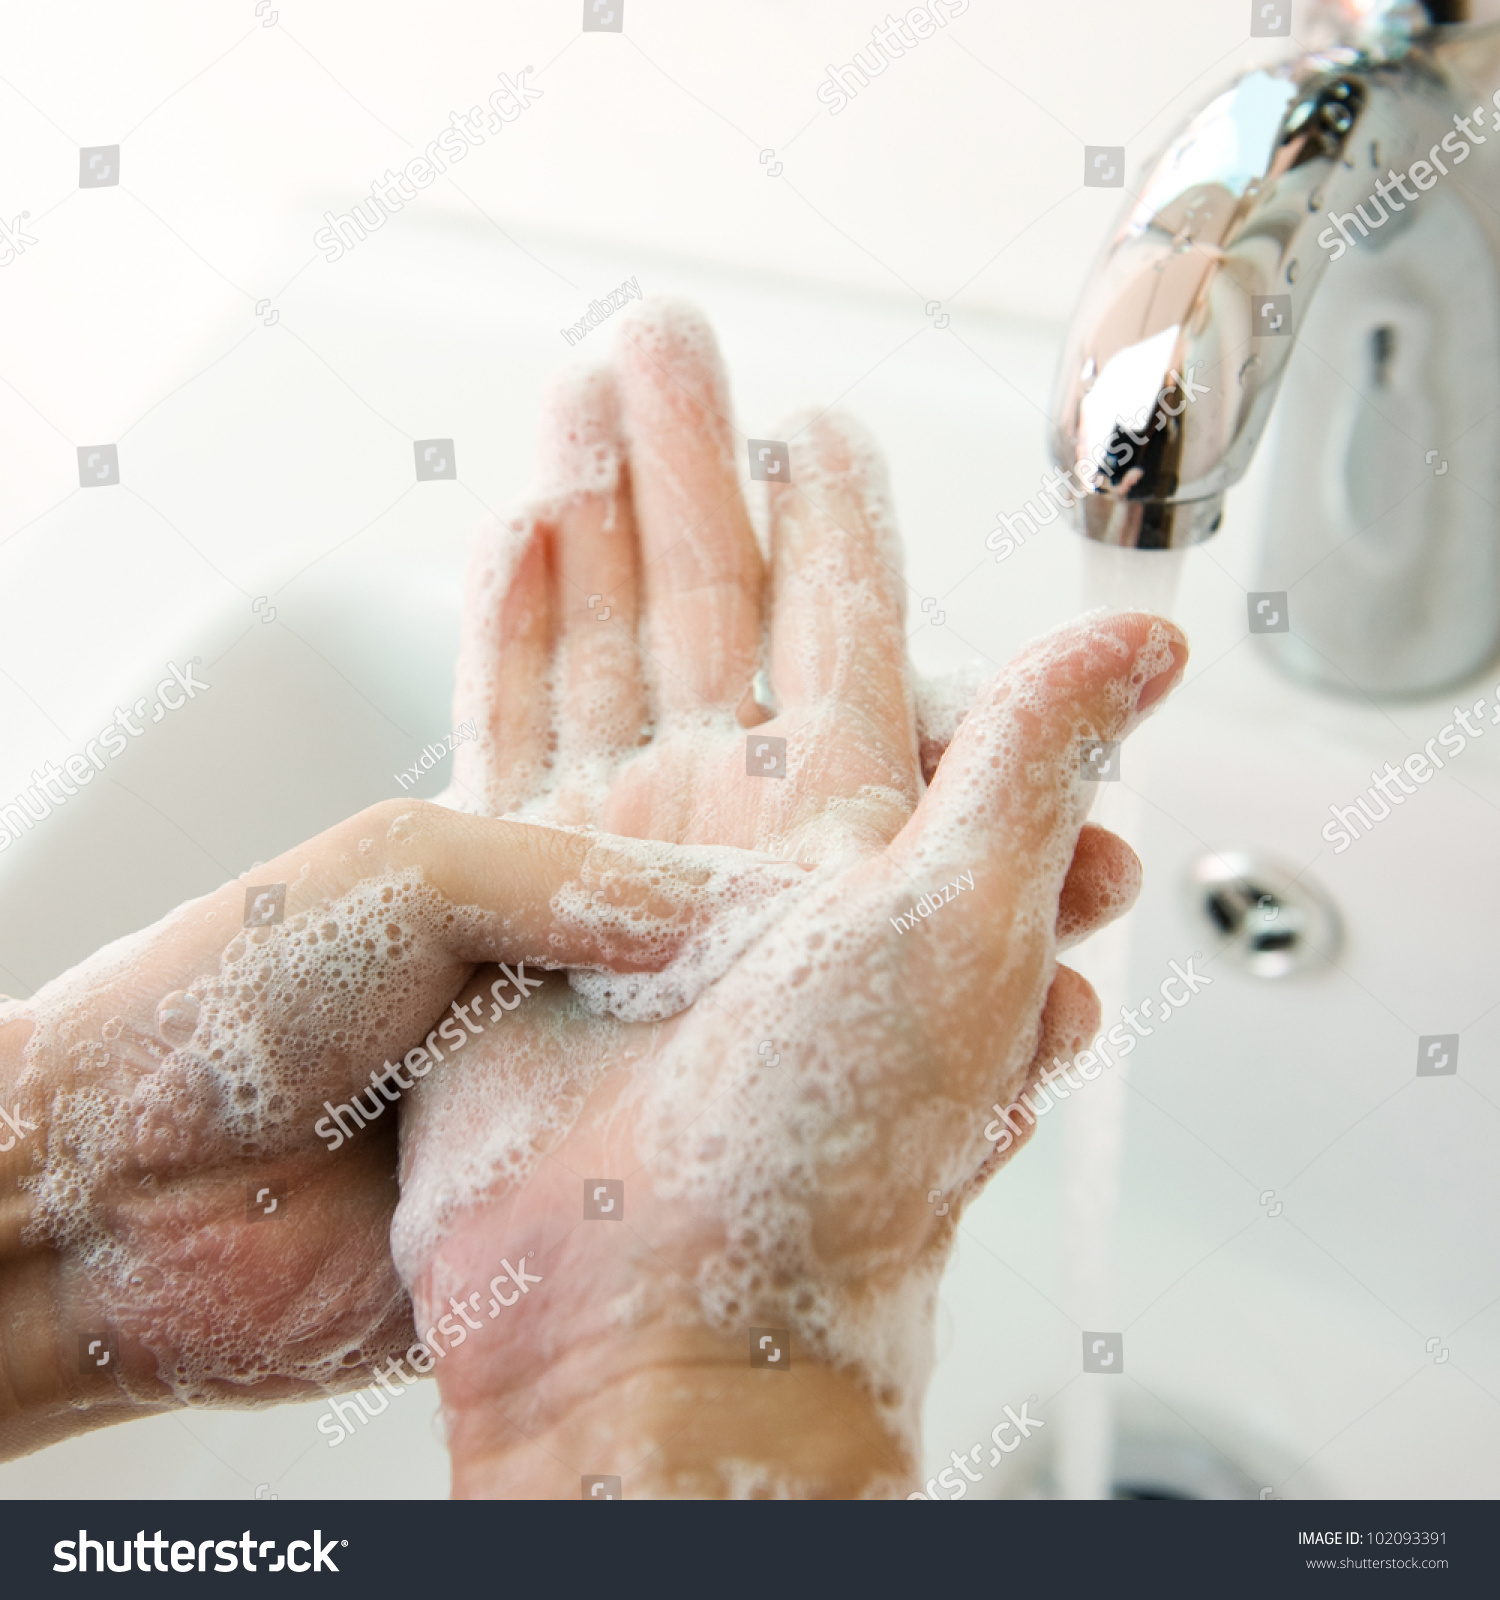 Washing of hands with soap under running water. #102093391